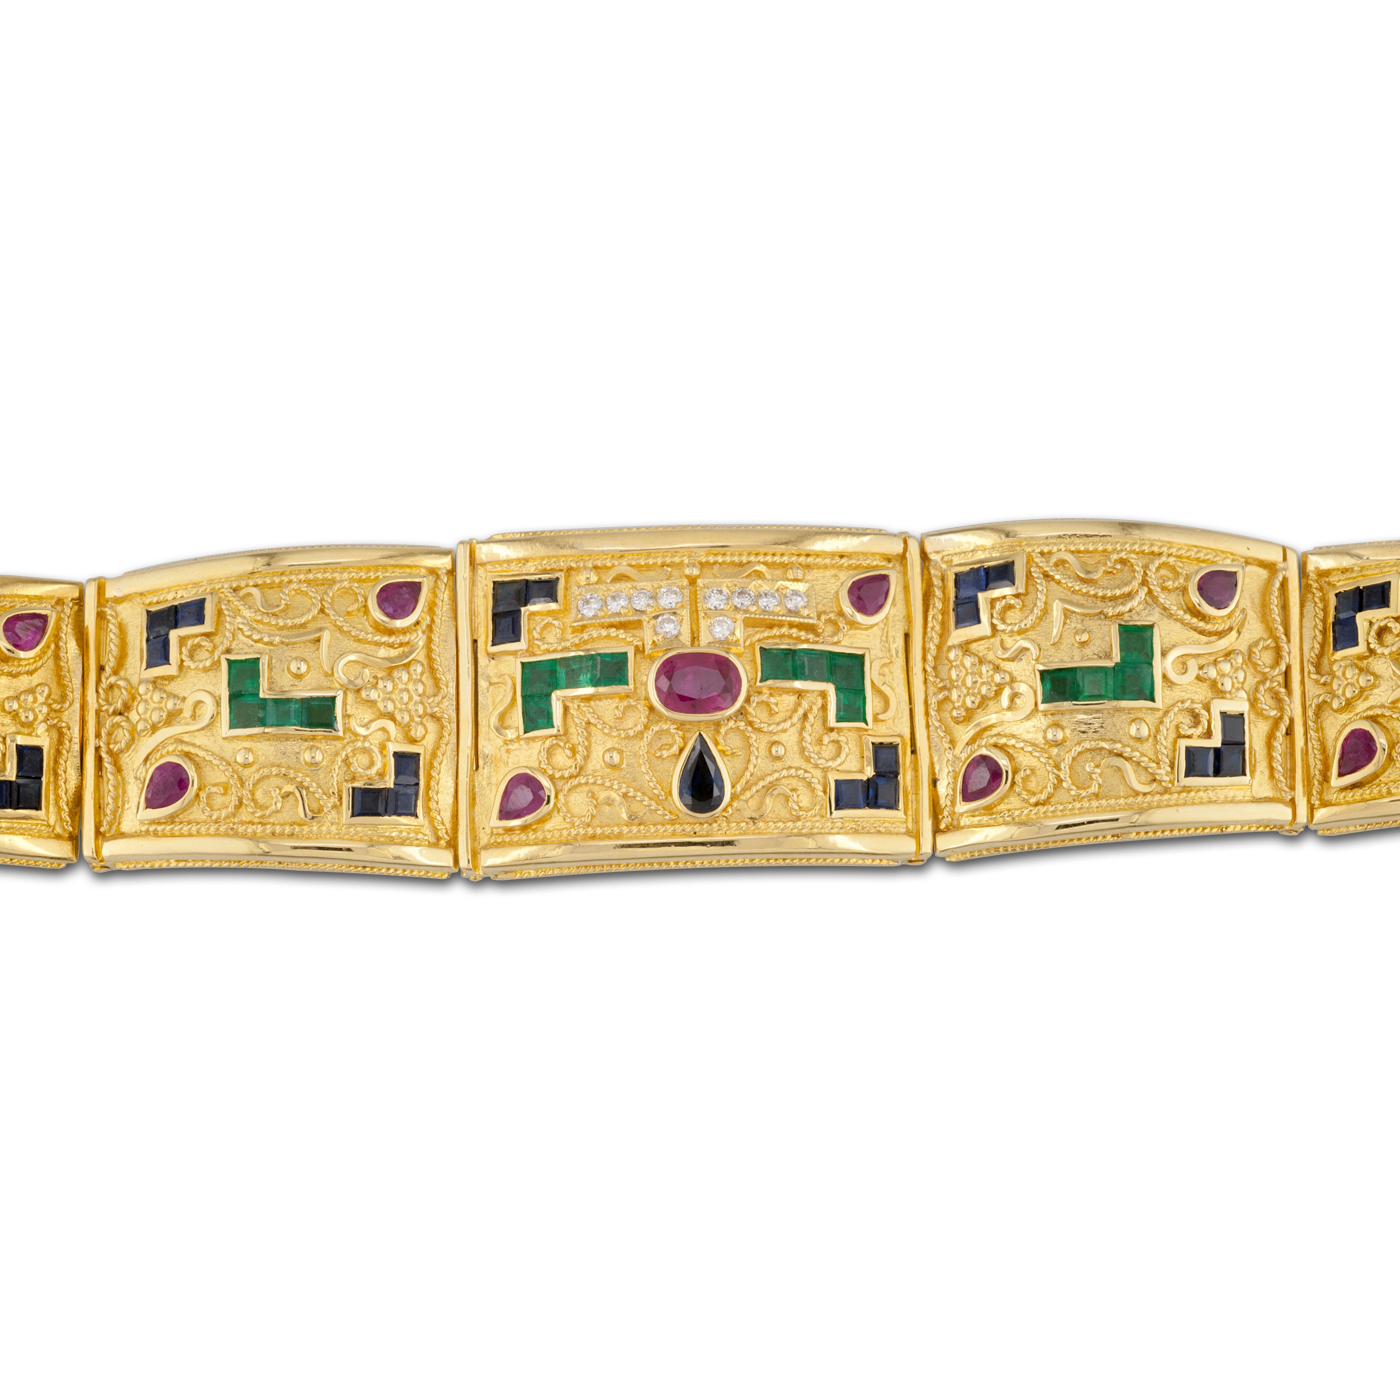 Imperial gold bracelet with precious stones